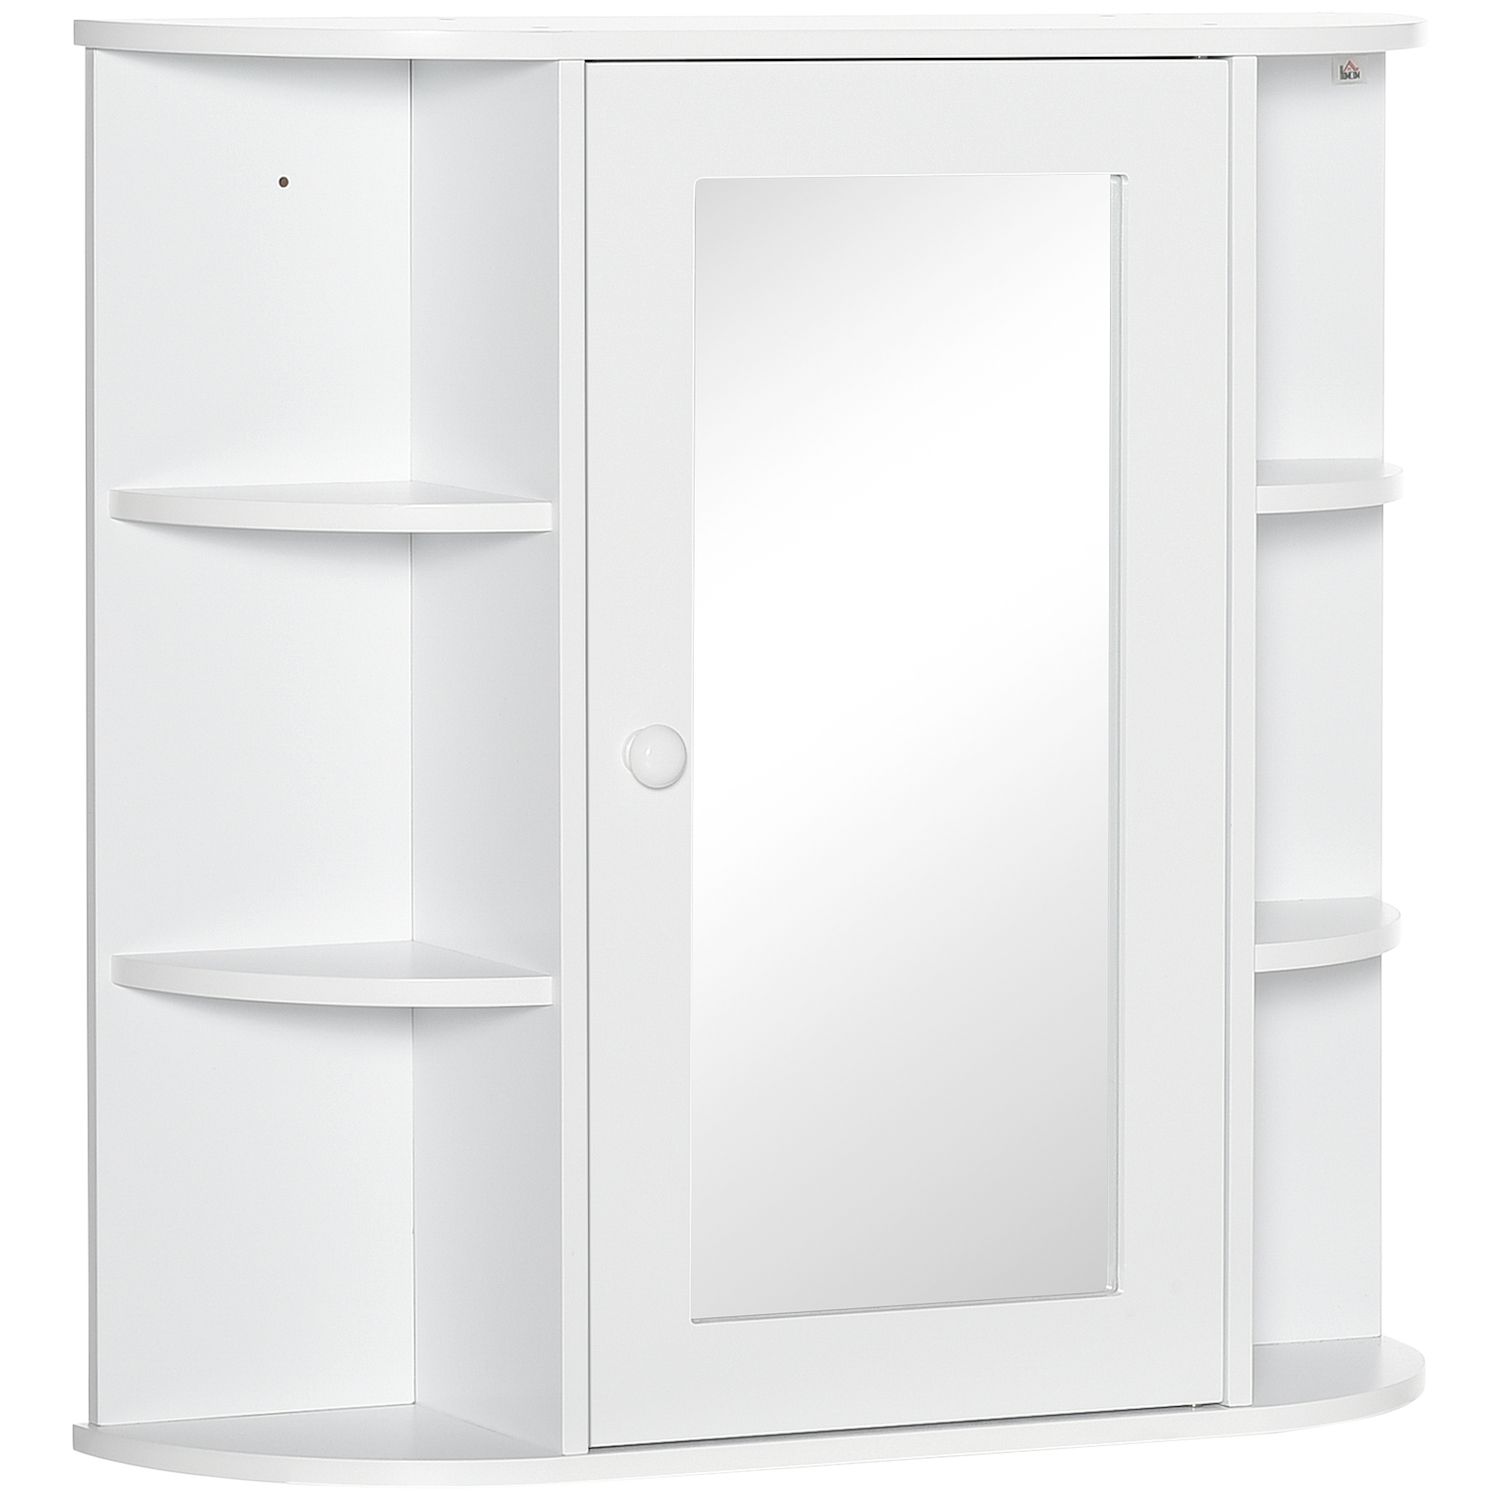 Alaterre Furniture Dorset 27W x 29H Wall Mounted Bath Storage Cabinet with Two Open Shelves